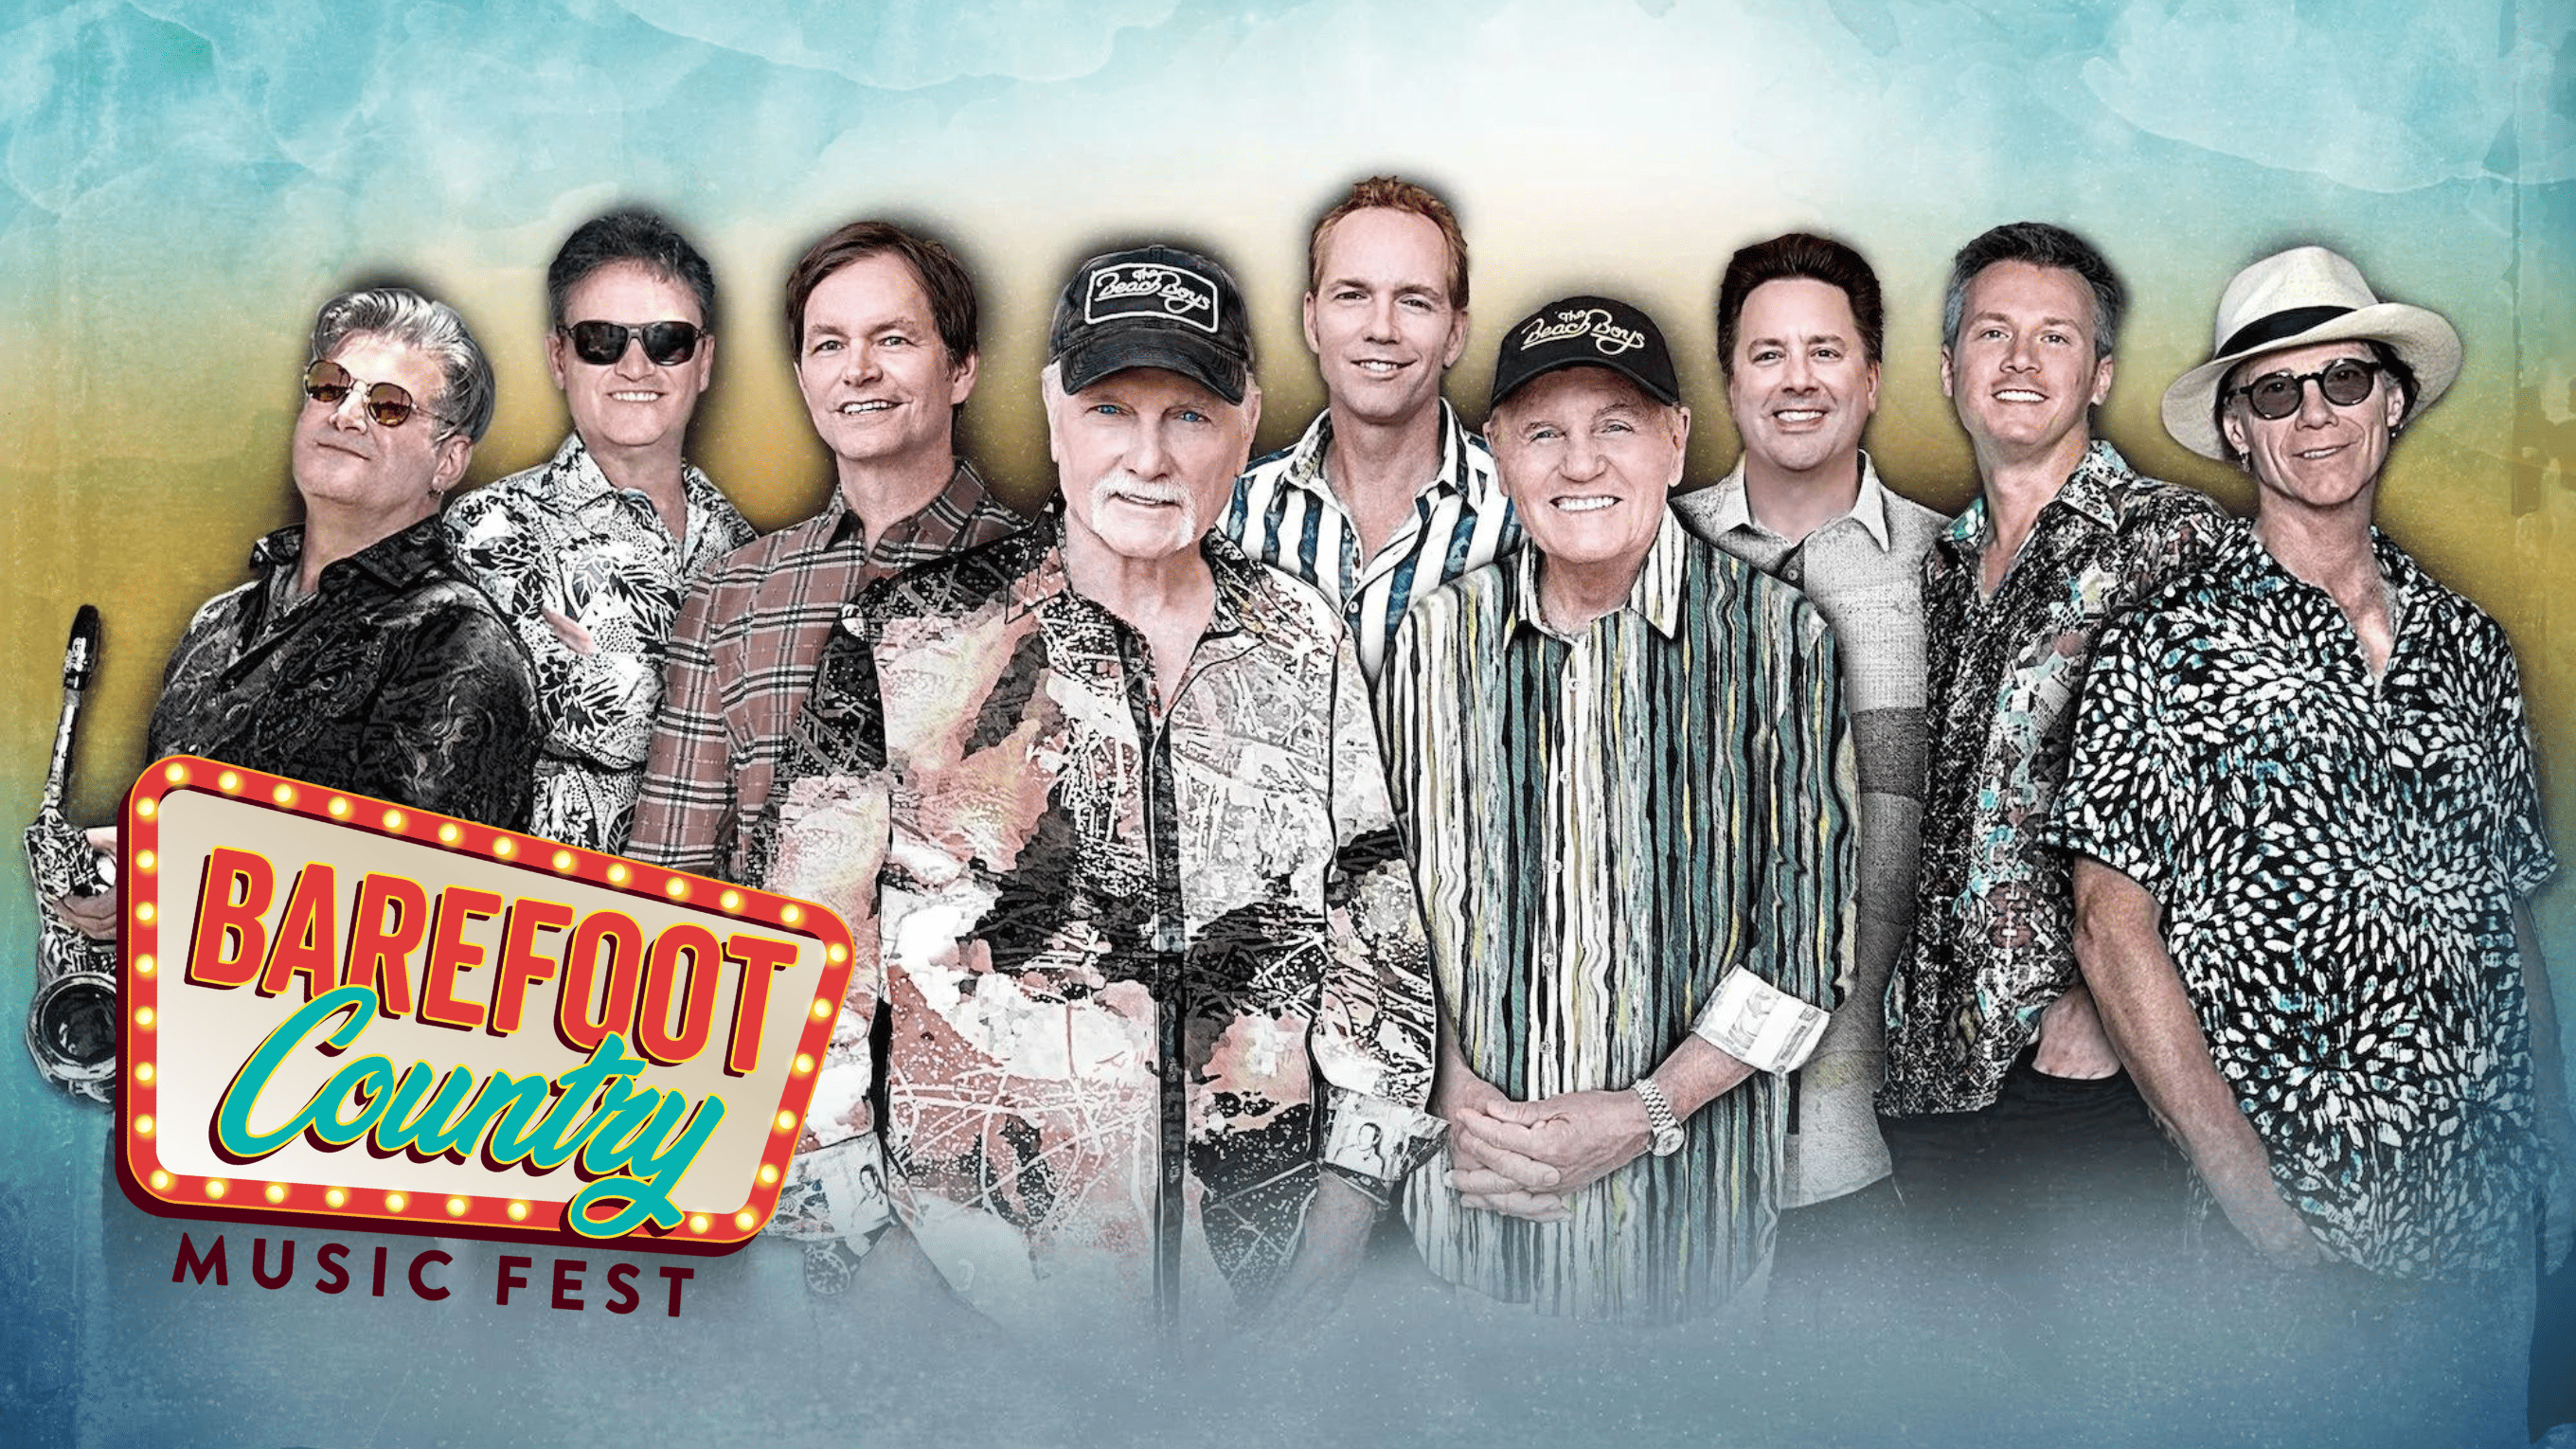 The Beach Boys Are Coming to The Barefoot Country Music Fest